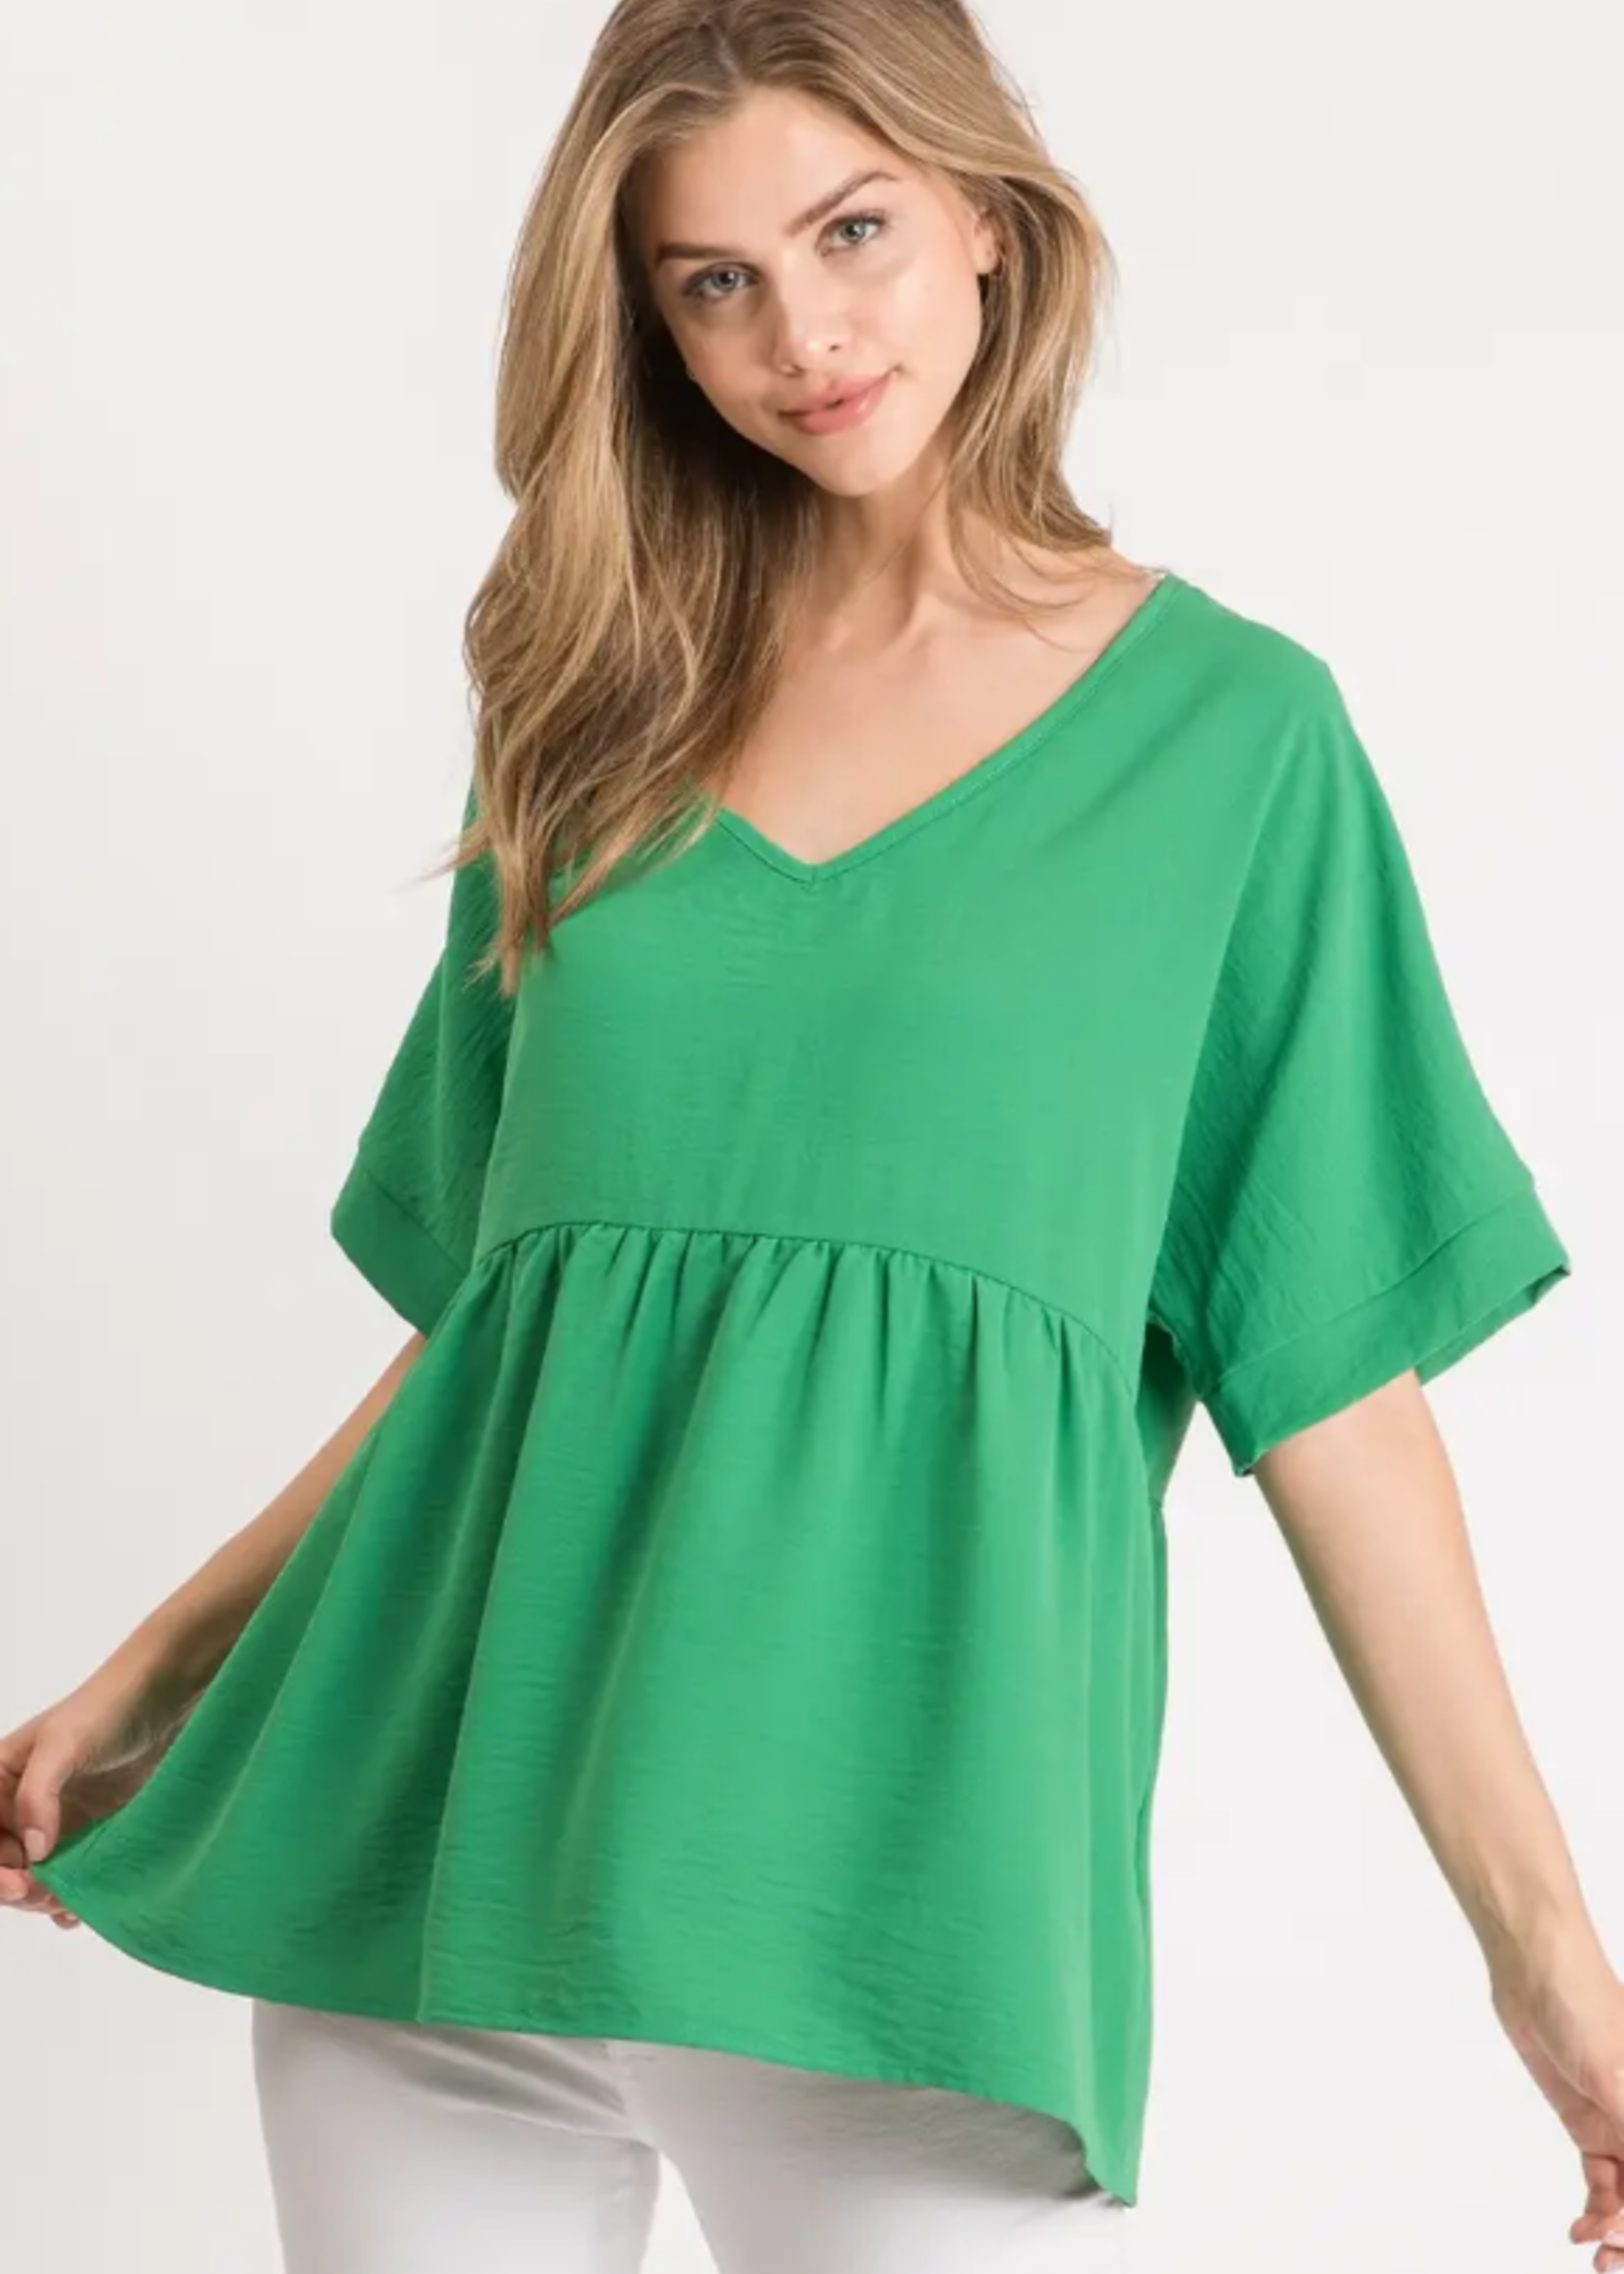 Solid Baby Doll Top - Kelly Green